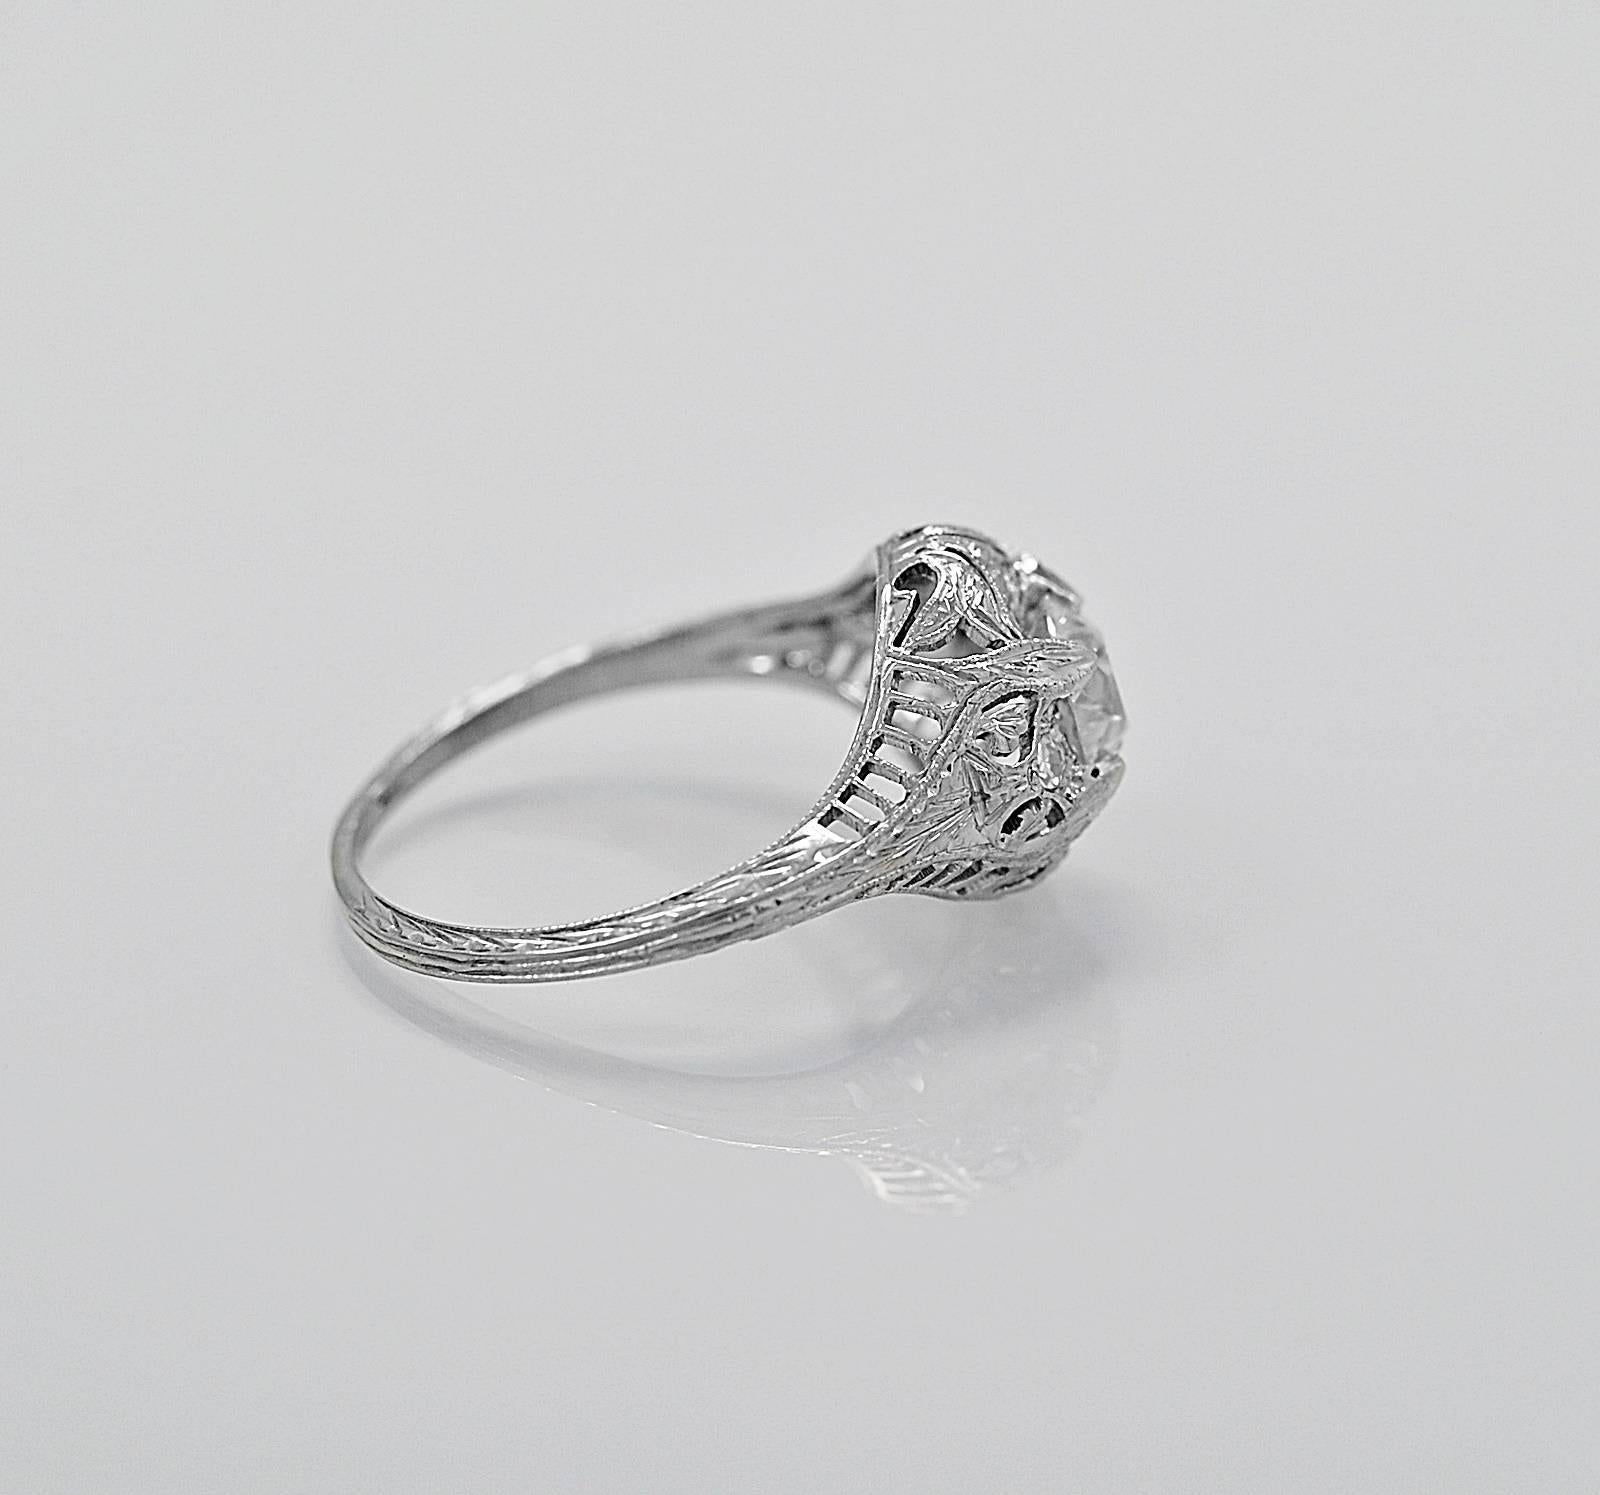 A wonderful antique engagement ring crafted in platinum that features a .66ct. apx. European cut center diamond with VS1 clarity and F-G color. The mounting is meticulously filigreed. It is a stunning and masterful piece of art! 

Primary